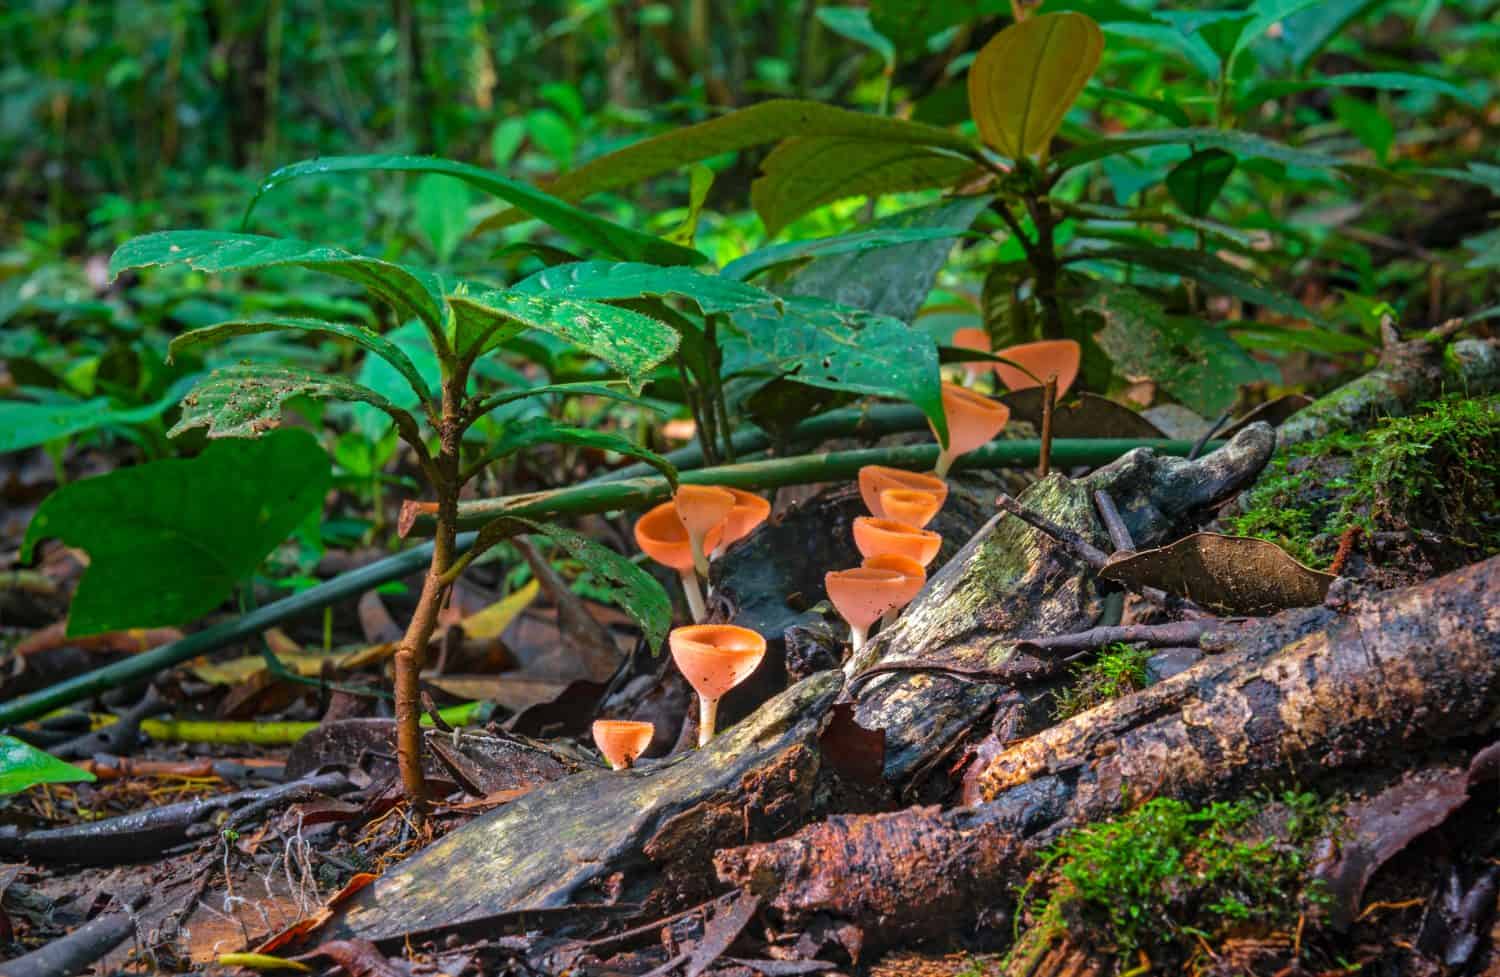 Long exposure photograph of the Amazon Rainforest floor with red neotropical cup fungus (Cookeina sulcipes) inside the Yasuni National Park by the Napo river, Ecuador.